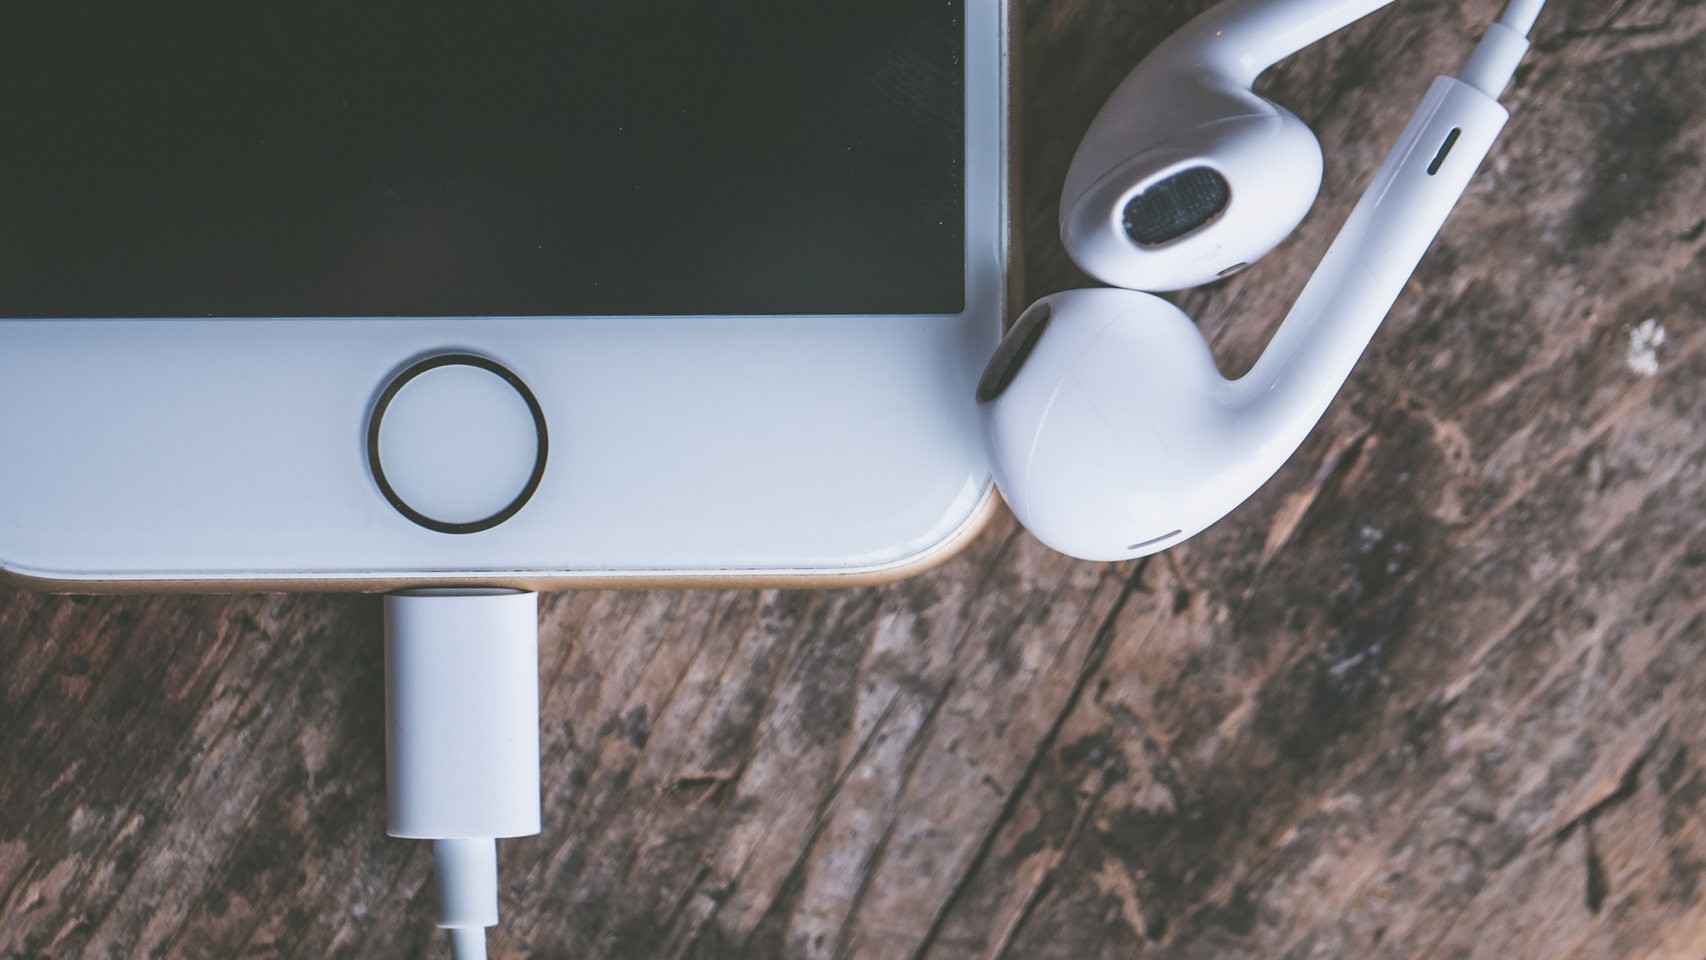 For the first time, iPhone and Android users will be able to use the same cable, if Apple chooses.